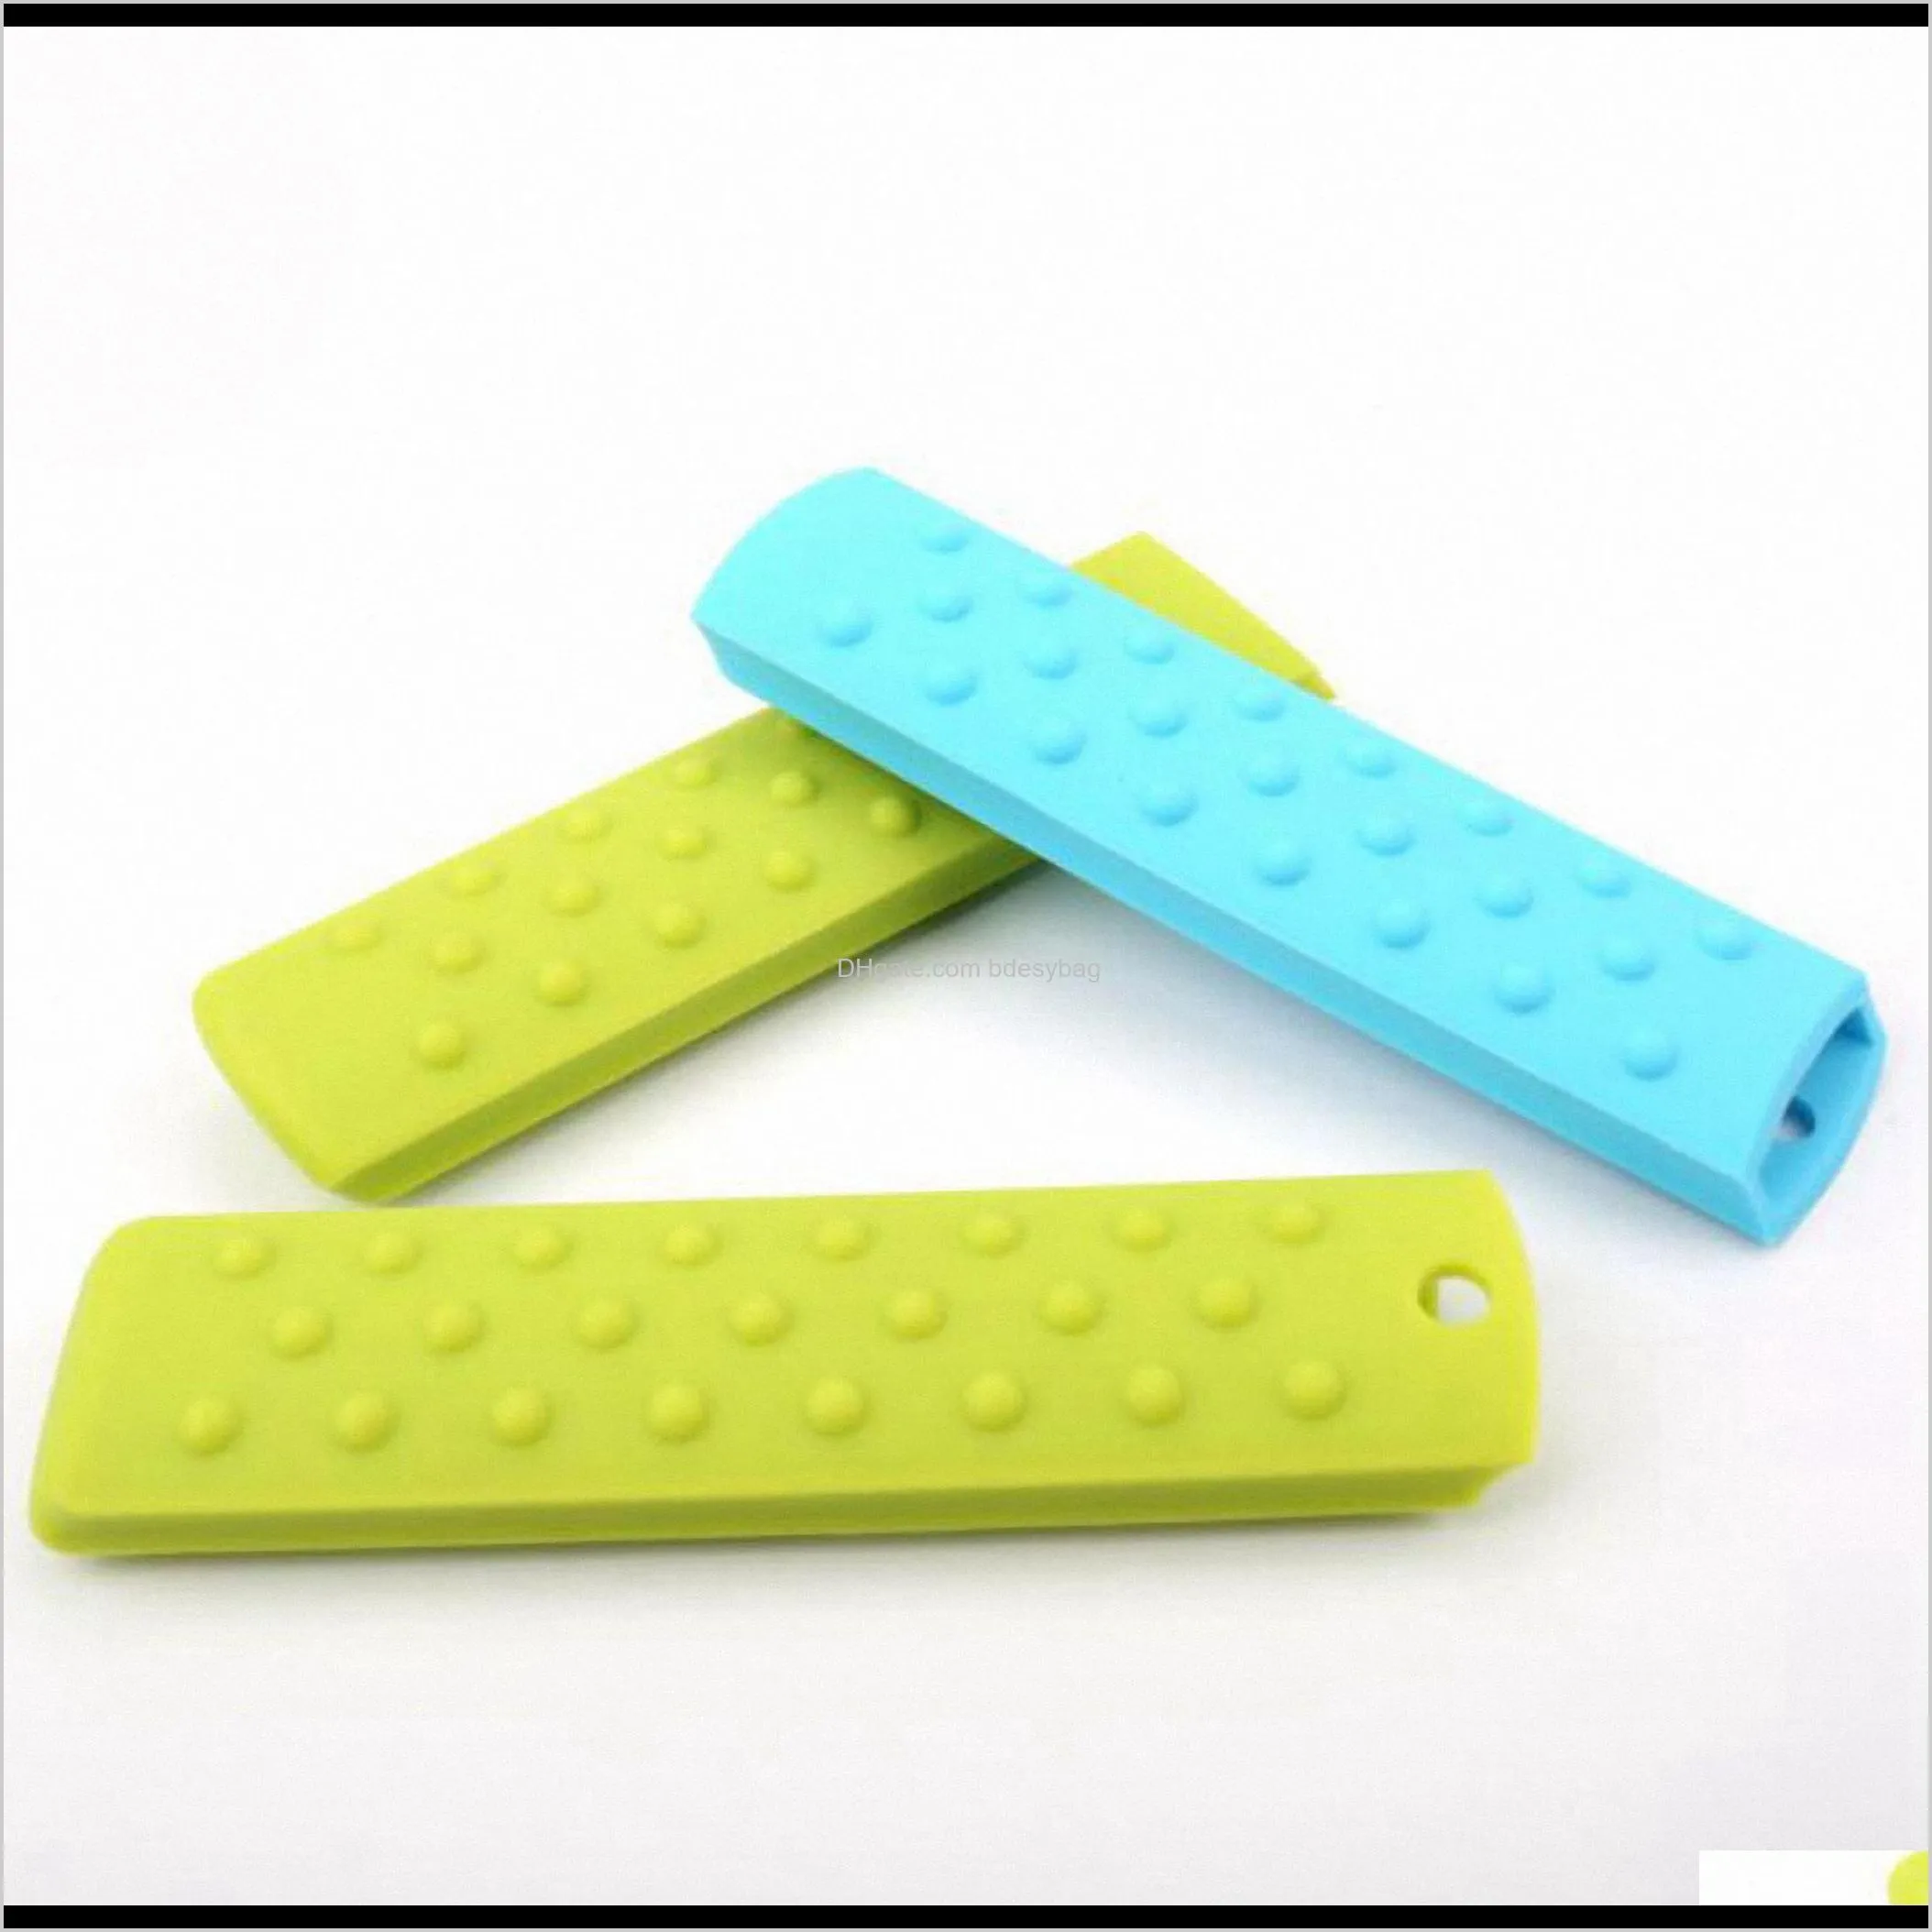 kinds silicone pot pan handle holder heat resistant anti skid anti hot protector brand new drop shiipping